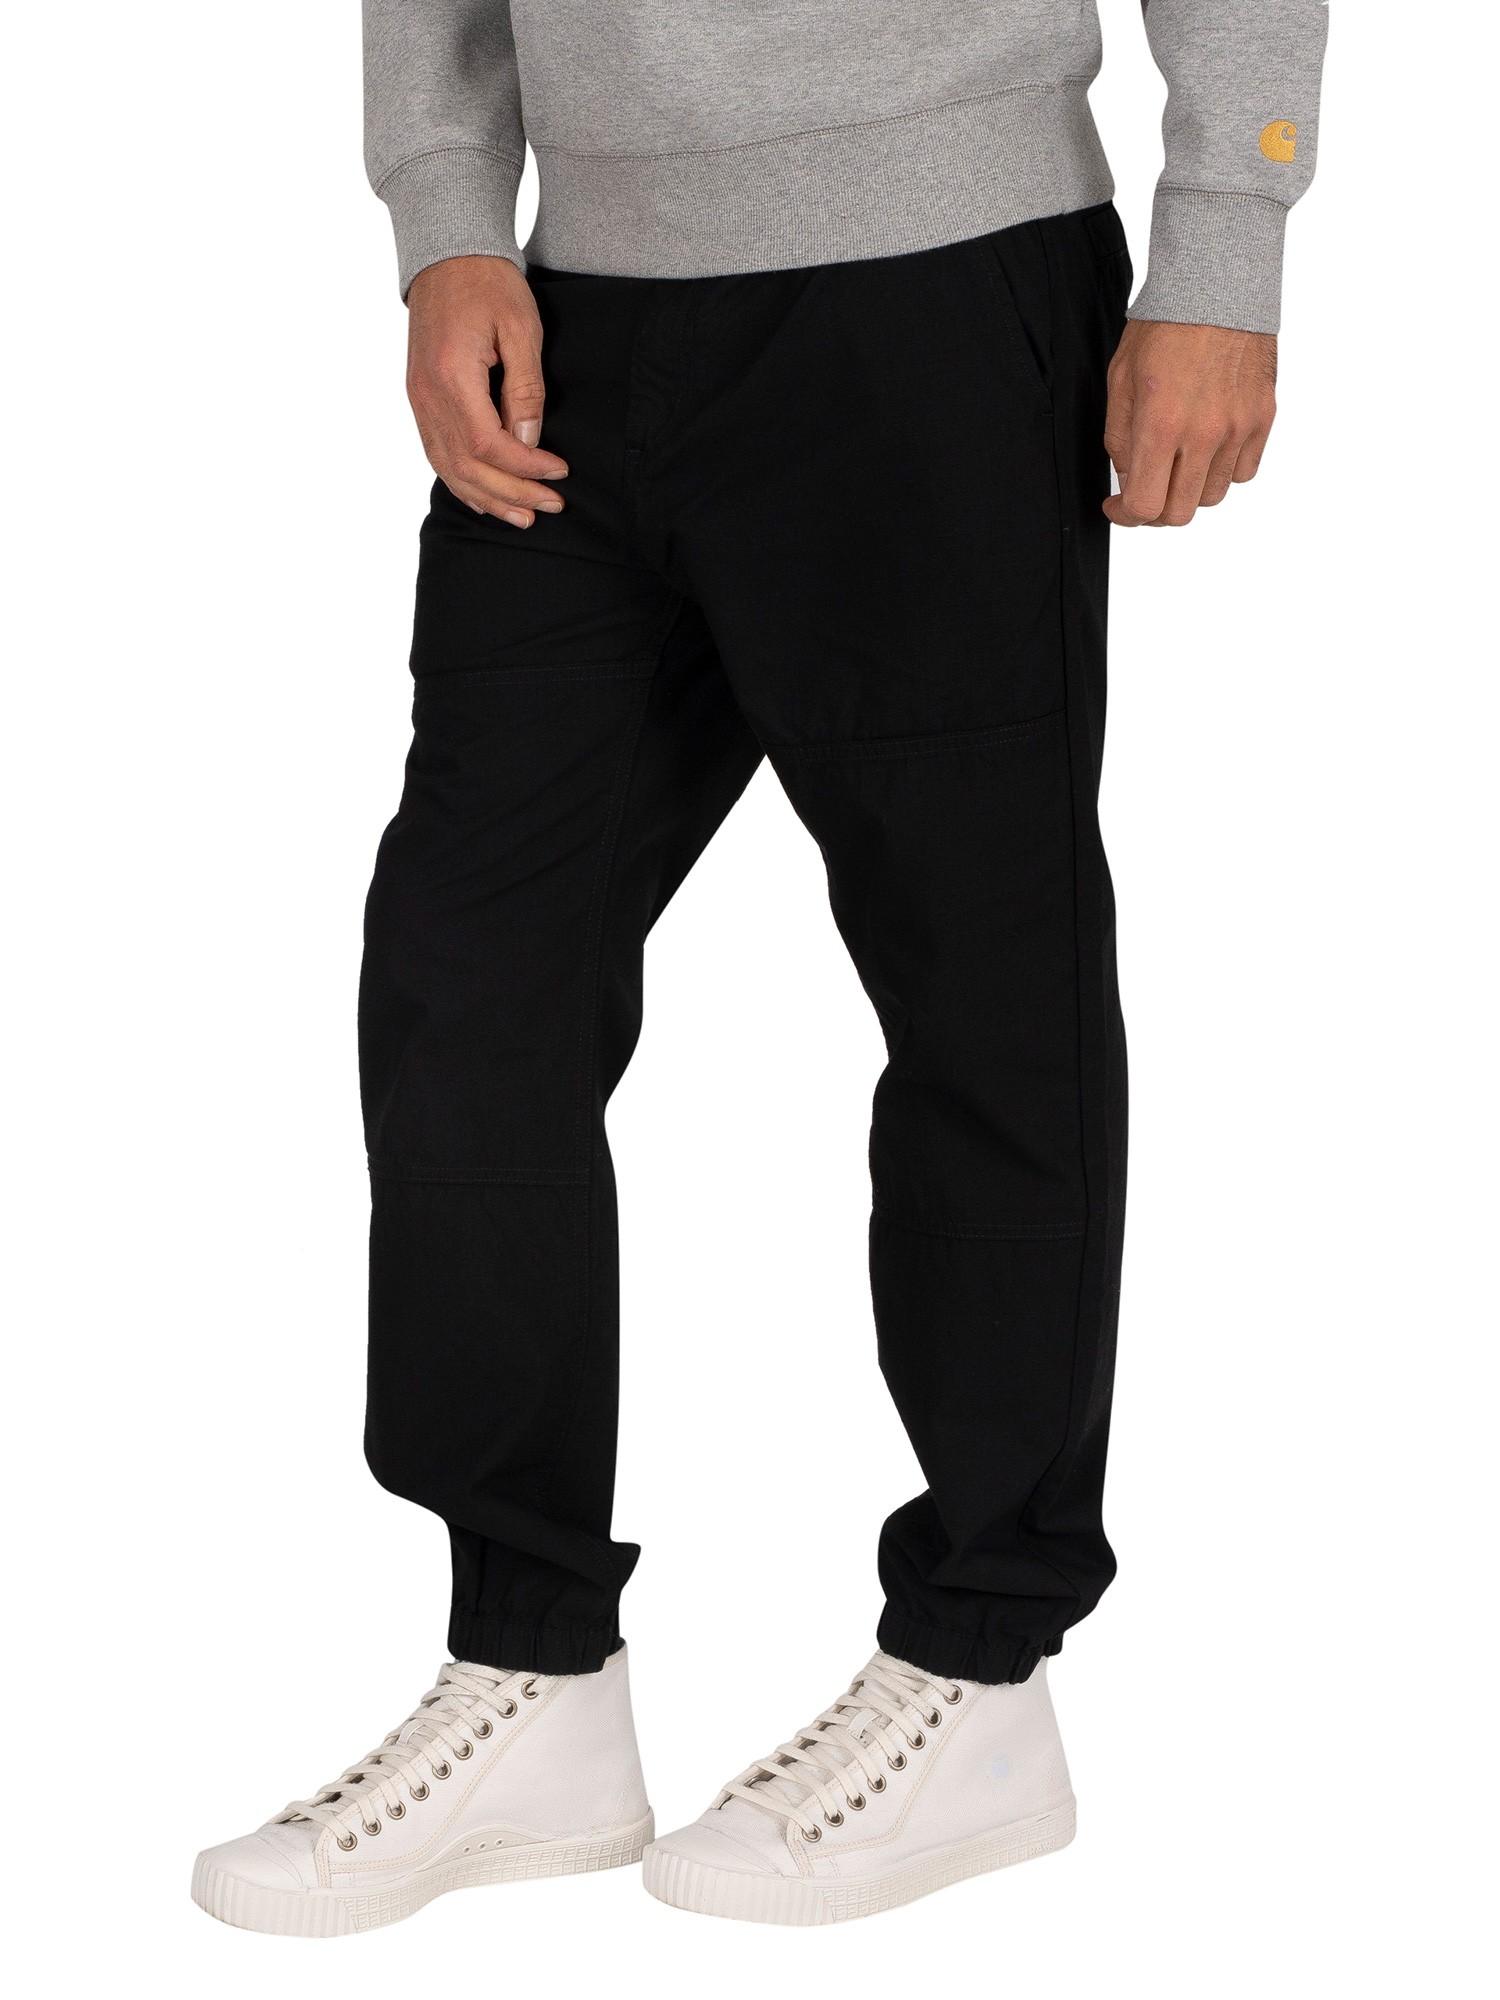 Carhartt WIP Marshall Joggers in Black for Men - Lyst